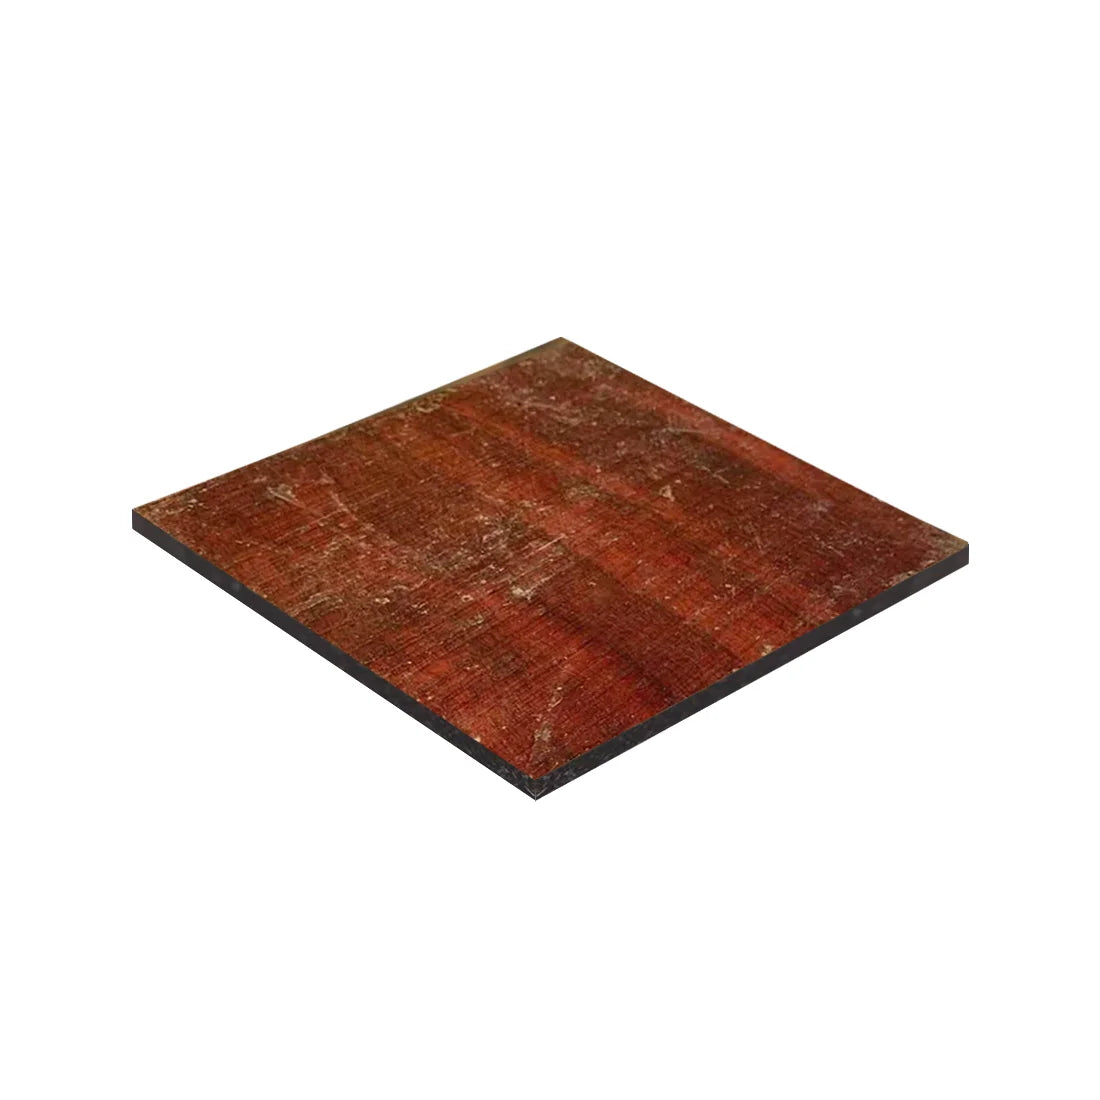 Bloodwood Guitar Rosette Square blanks 6” x 6” x 3mm - Exotic Wood Zone - Buy online Across USA 